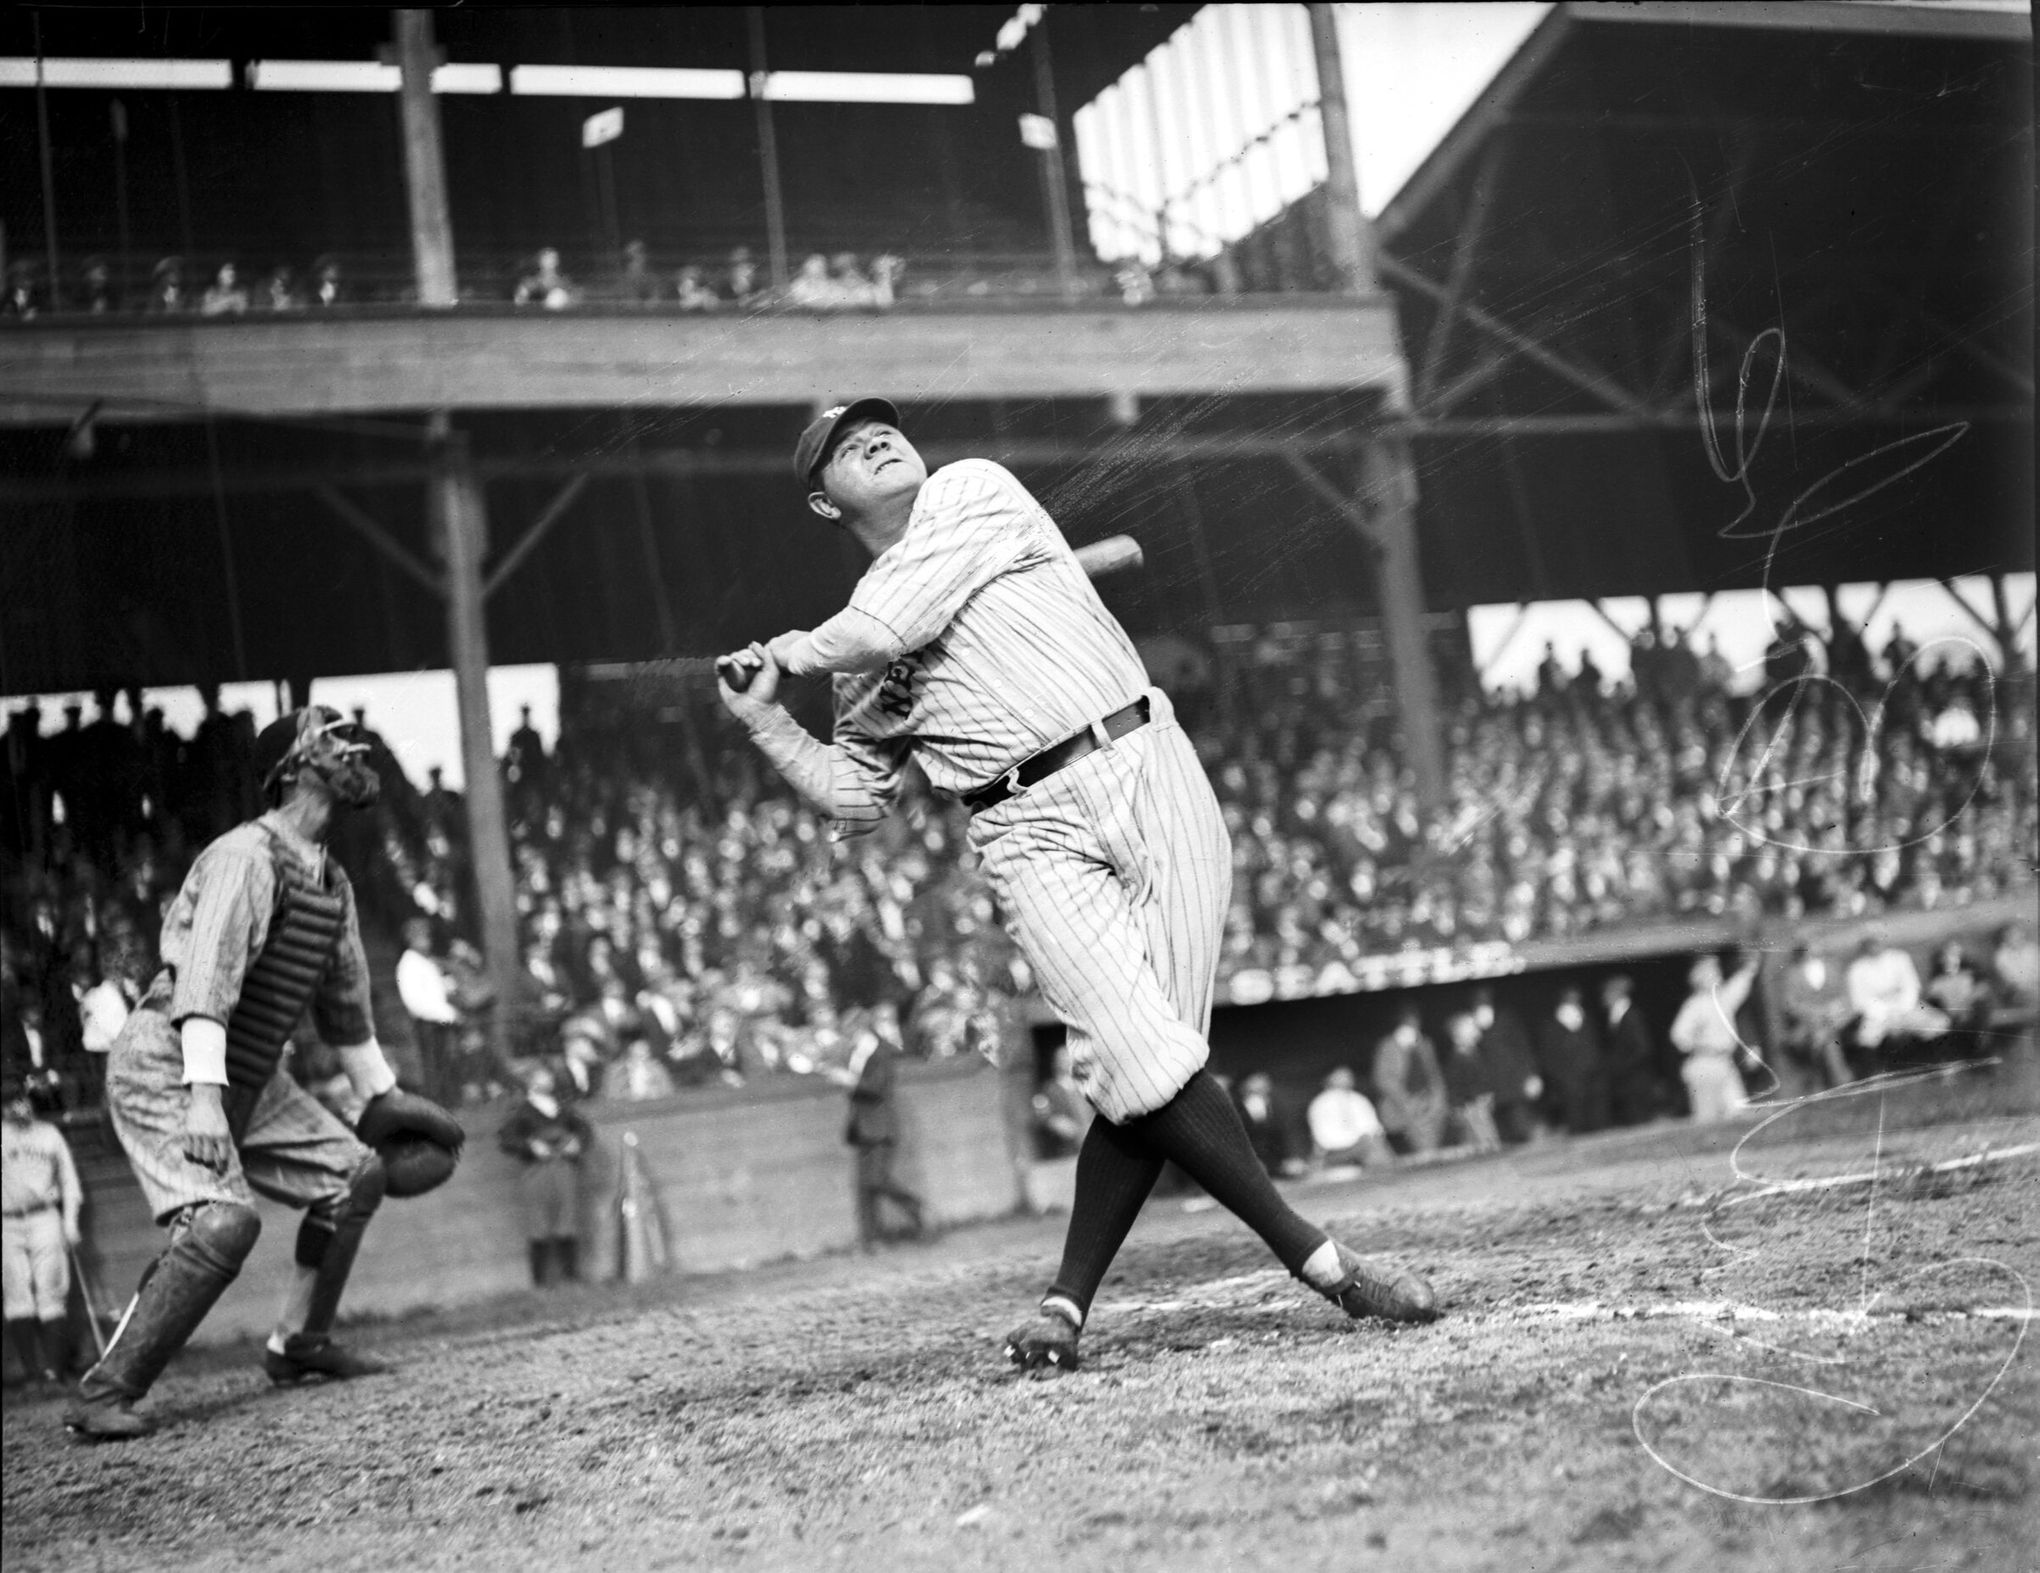 babe ruth pictures